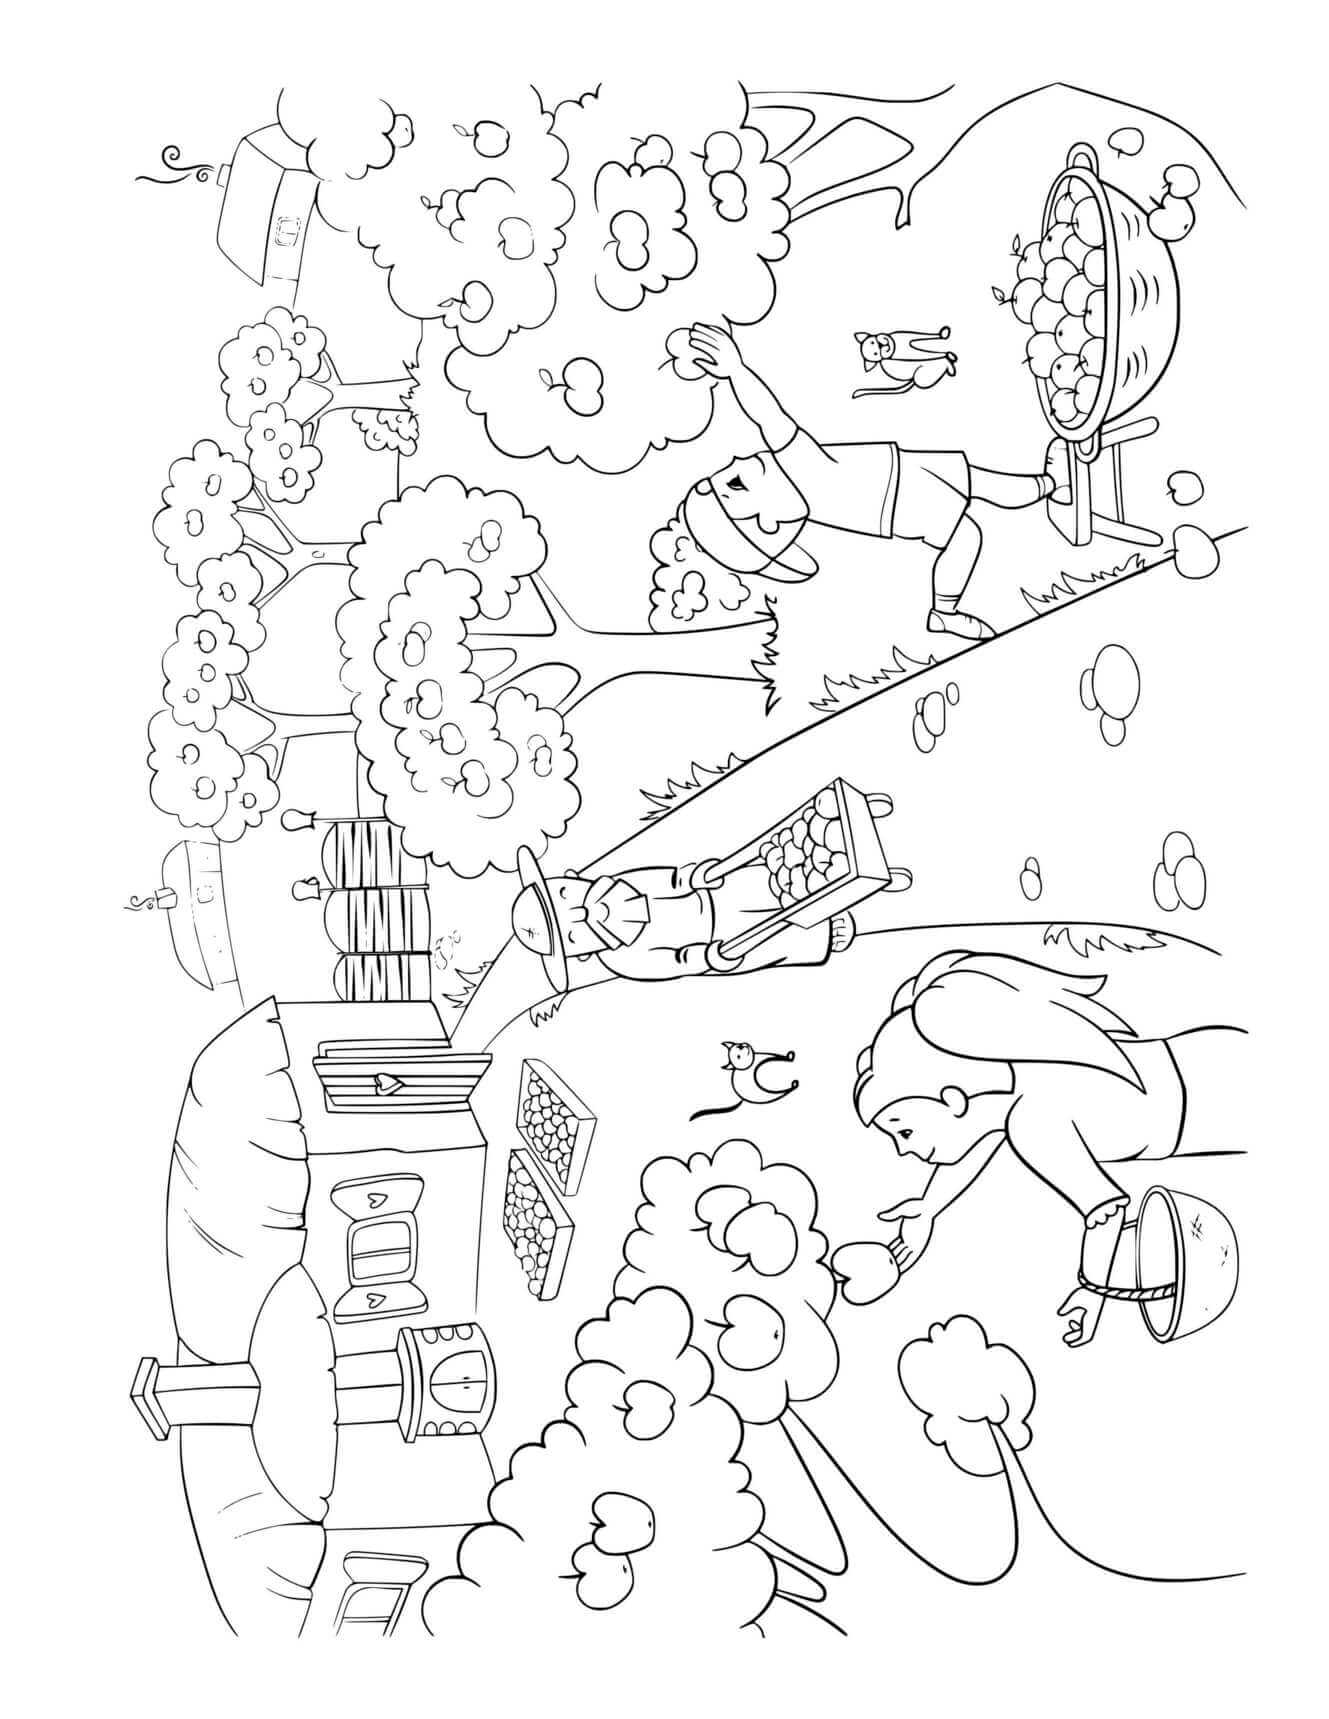 Fall Family Harvesting Apples Coloring Page